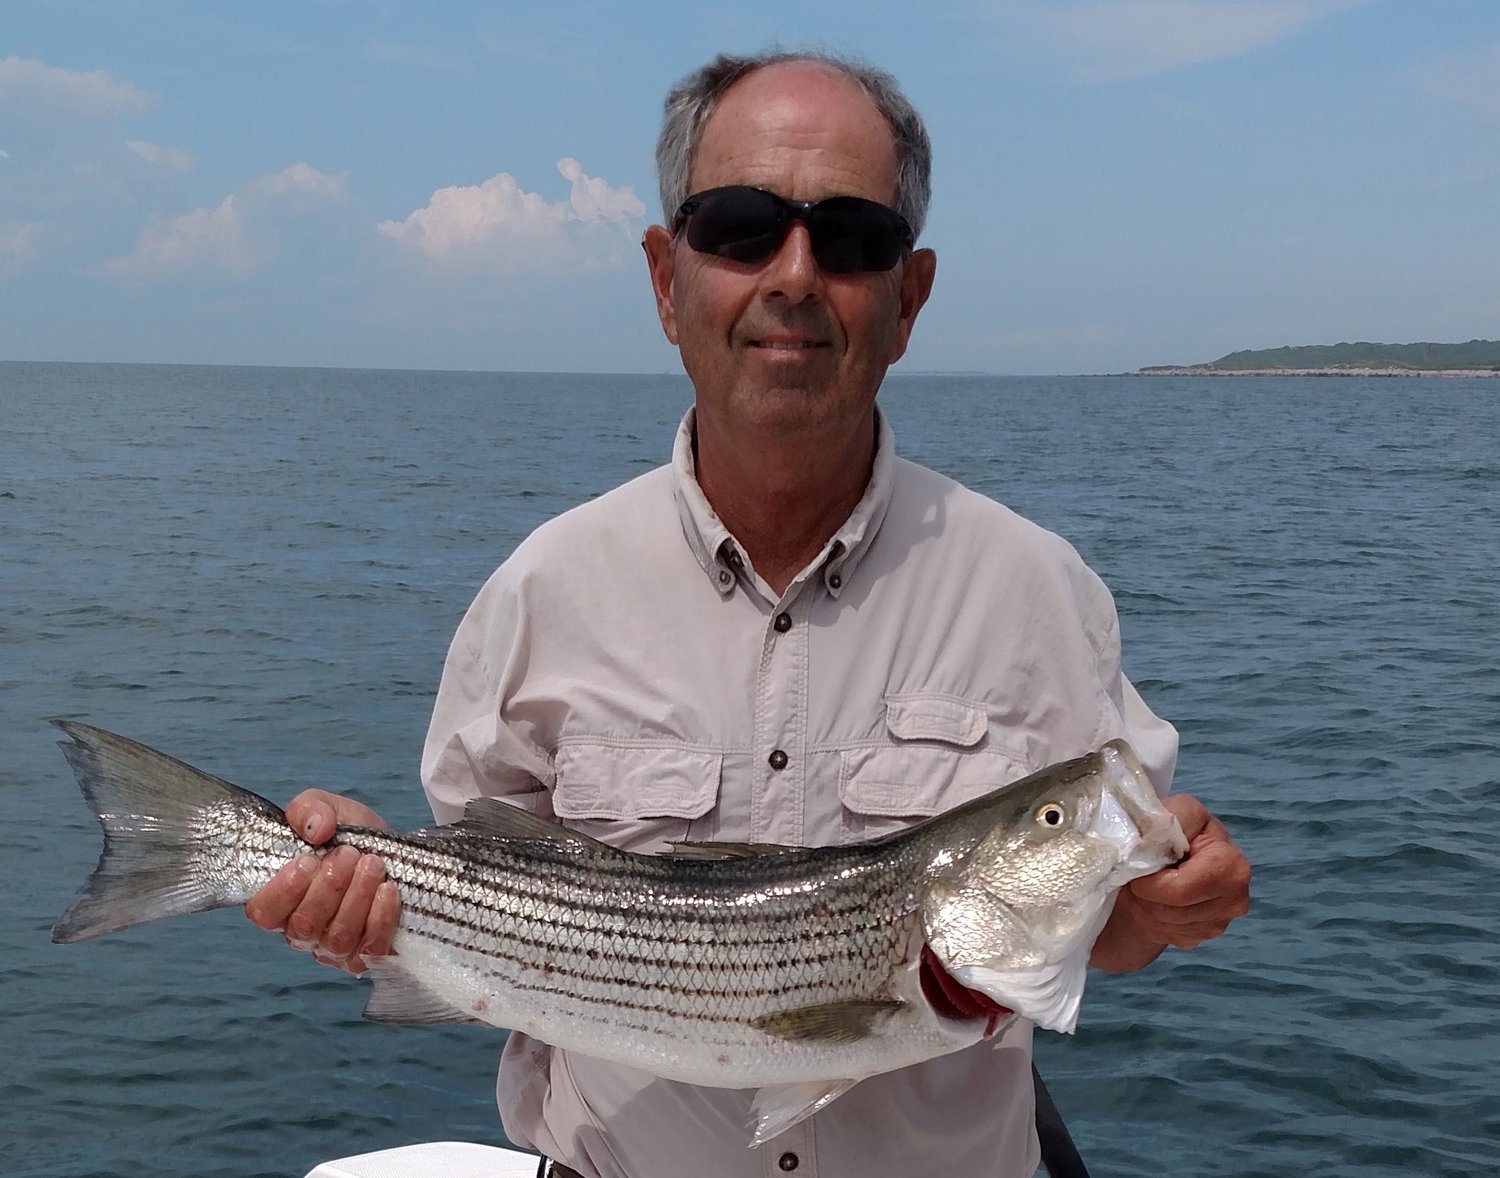 Electronic recording app: Fred DeFinis of Middletown and RISAA’s lead researcher said, “Anglers said their primary motivation to record catch & effort is to improve fisheries providing mangers with more robust data.”